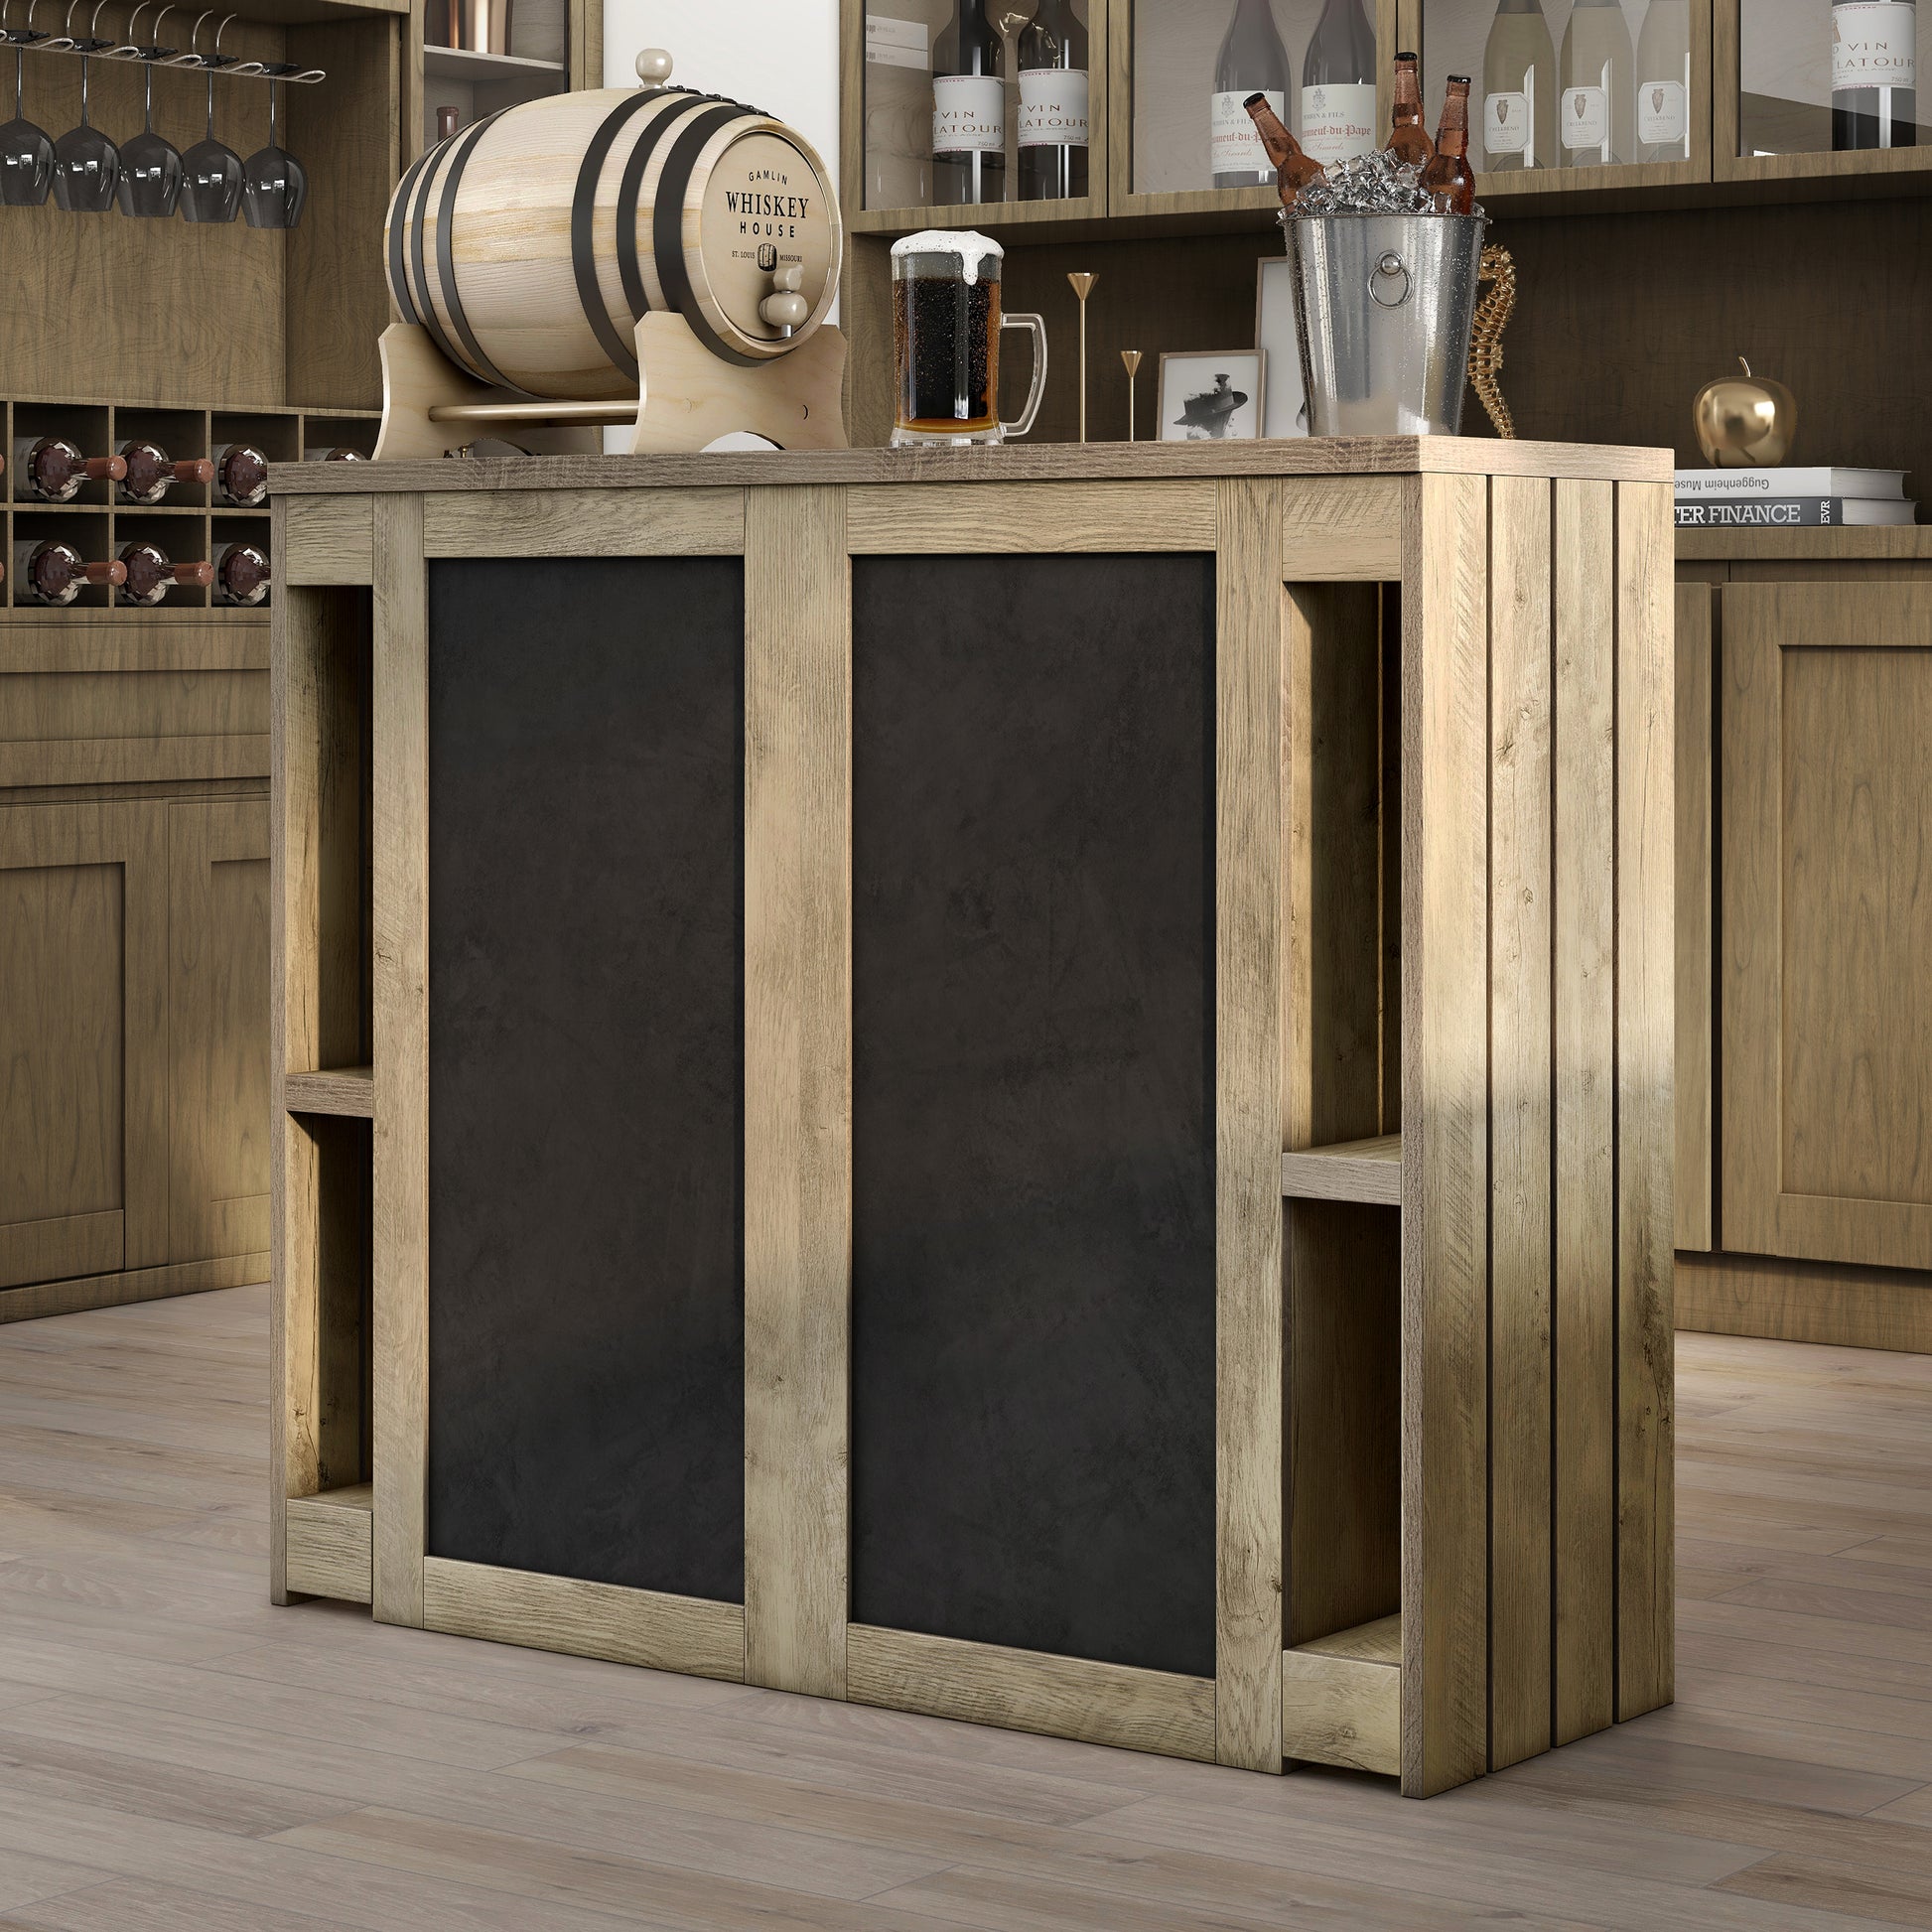 Left angled rustic weathered oak nine-shelf home bar with chalkboard doors in a living space with accessories